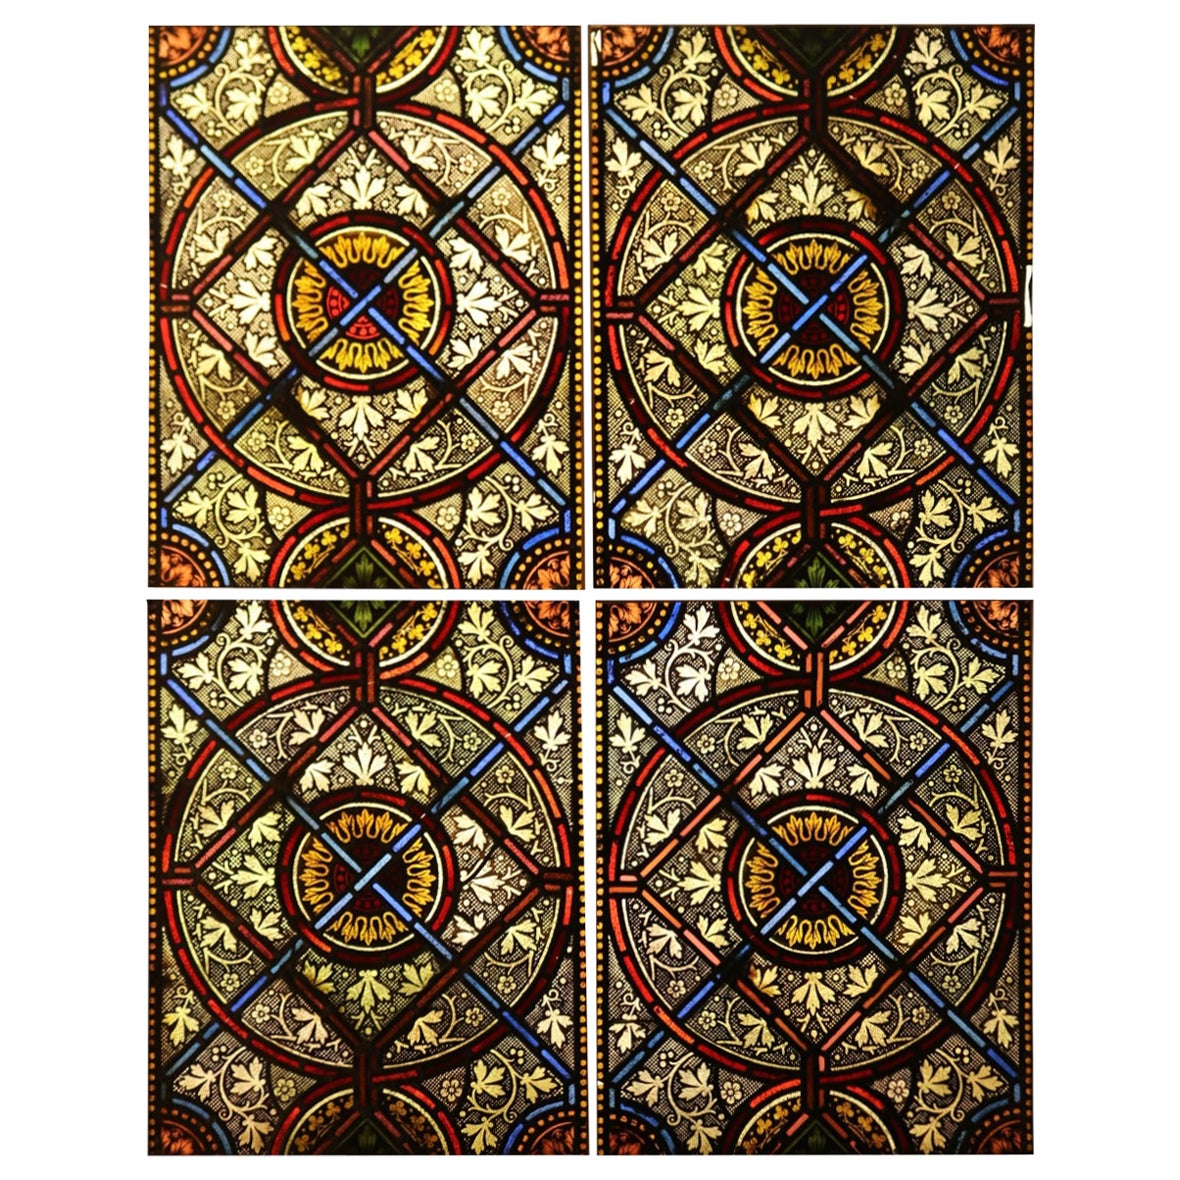 Reclaimed English Stained Glass Windows